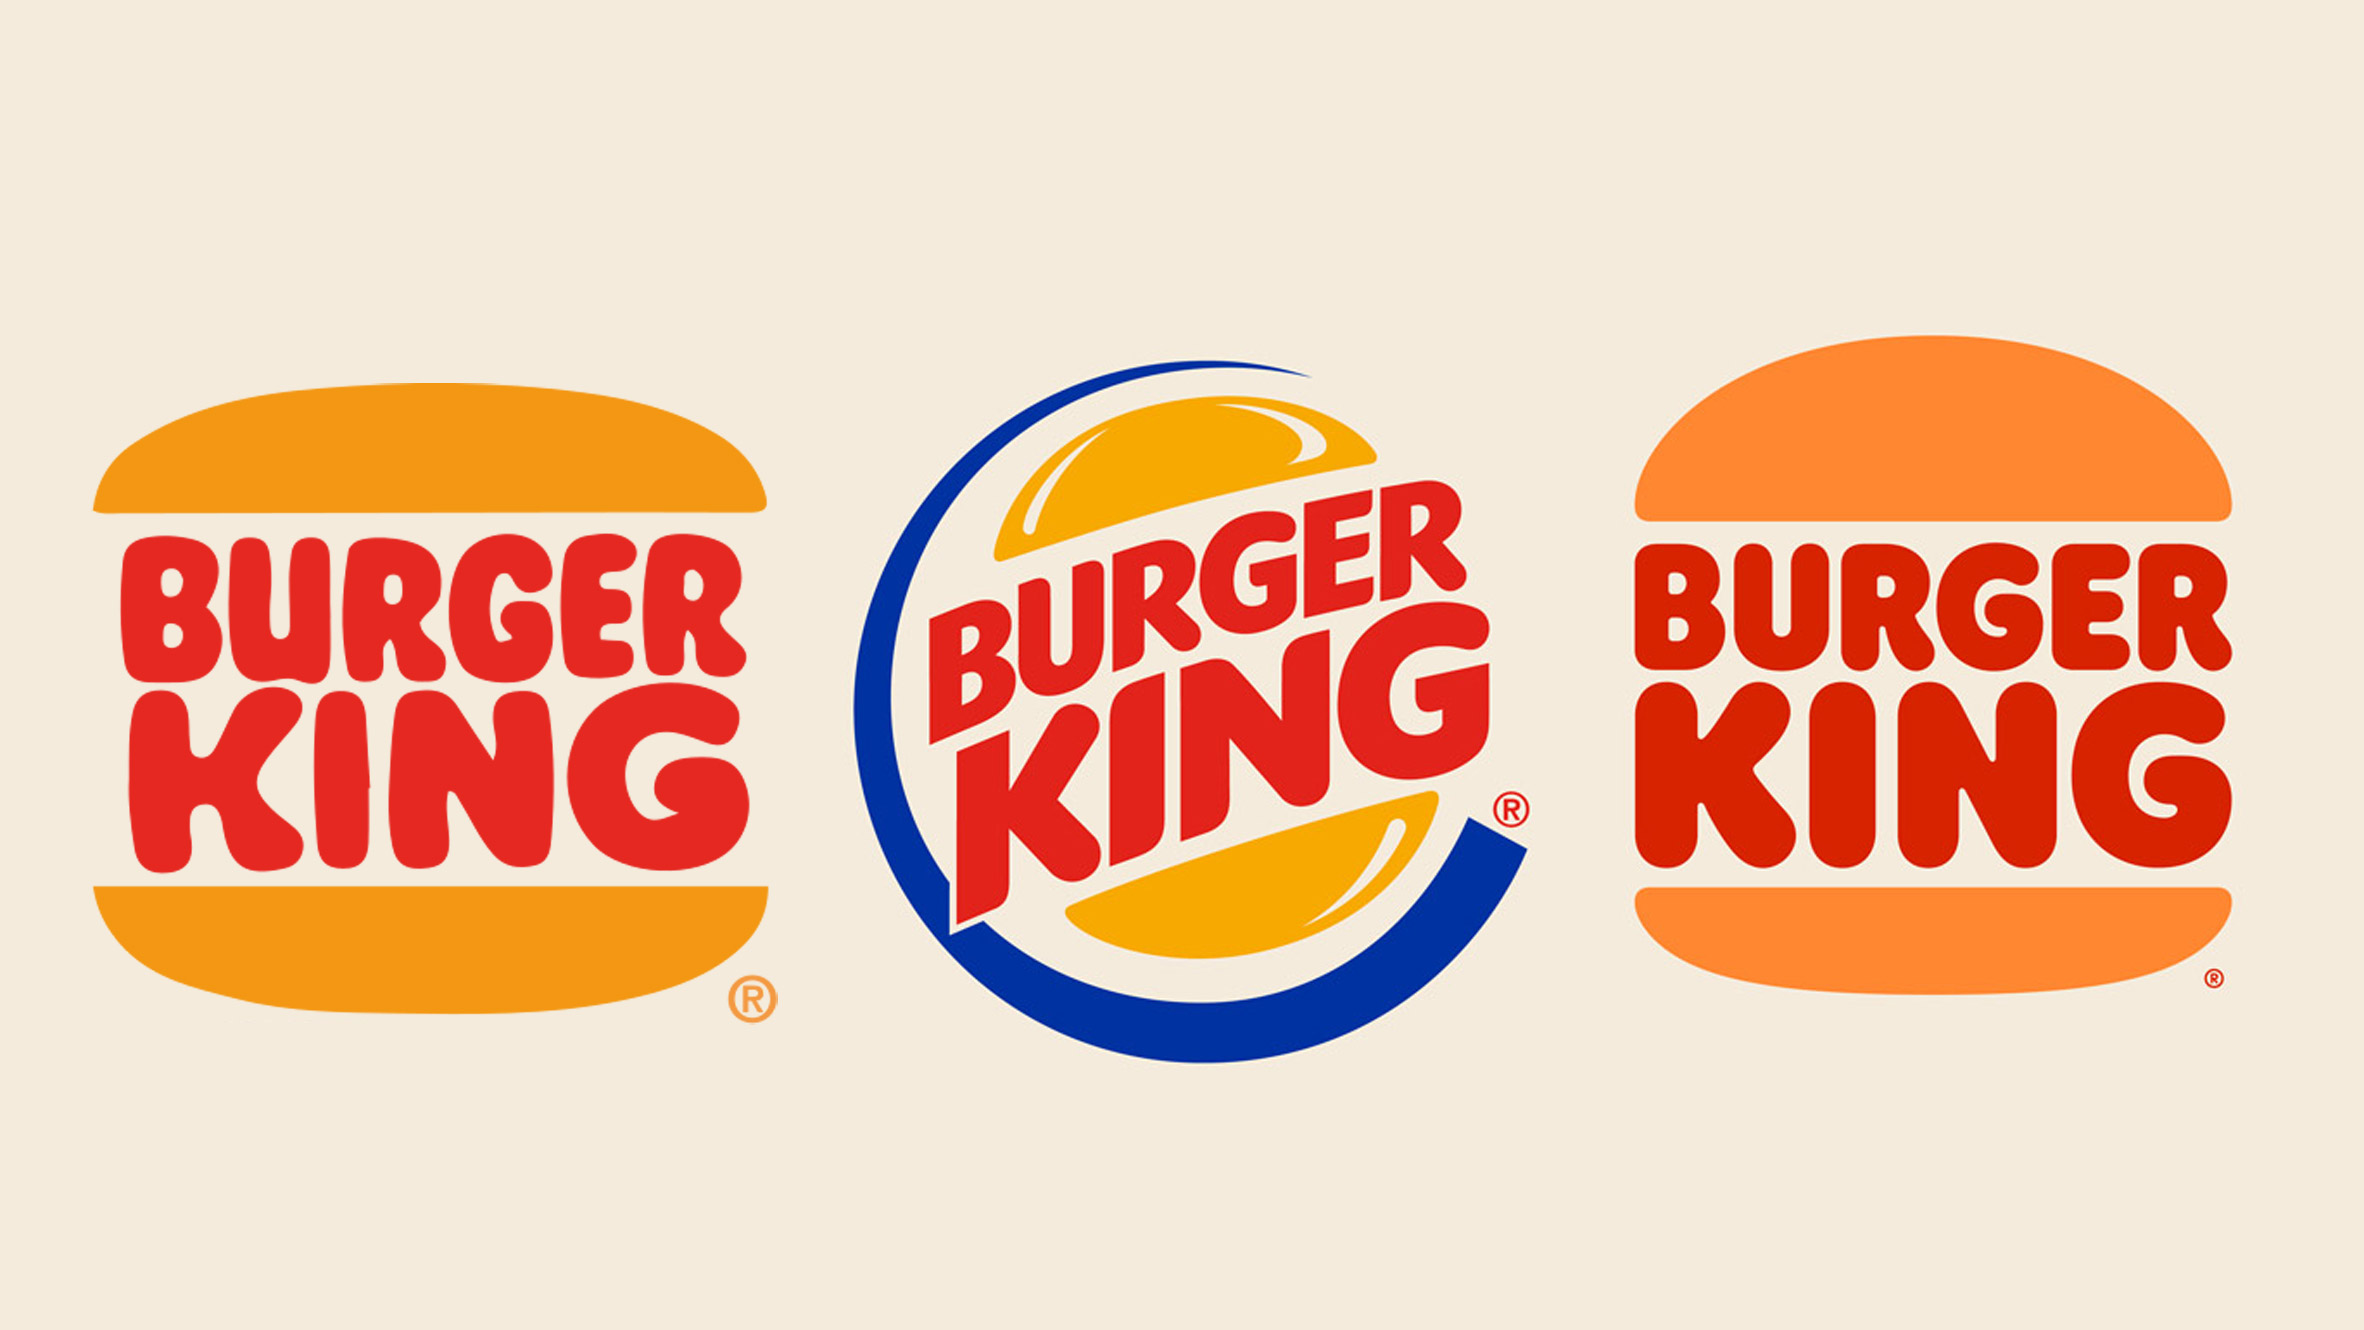 Rebrand Takes Burger King Back To When It Looked At Its Best